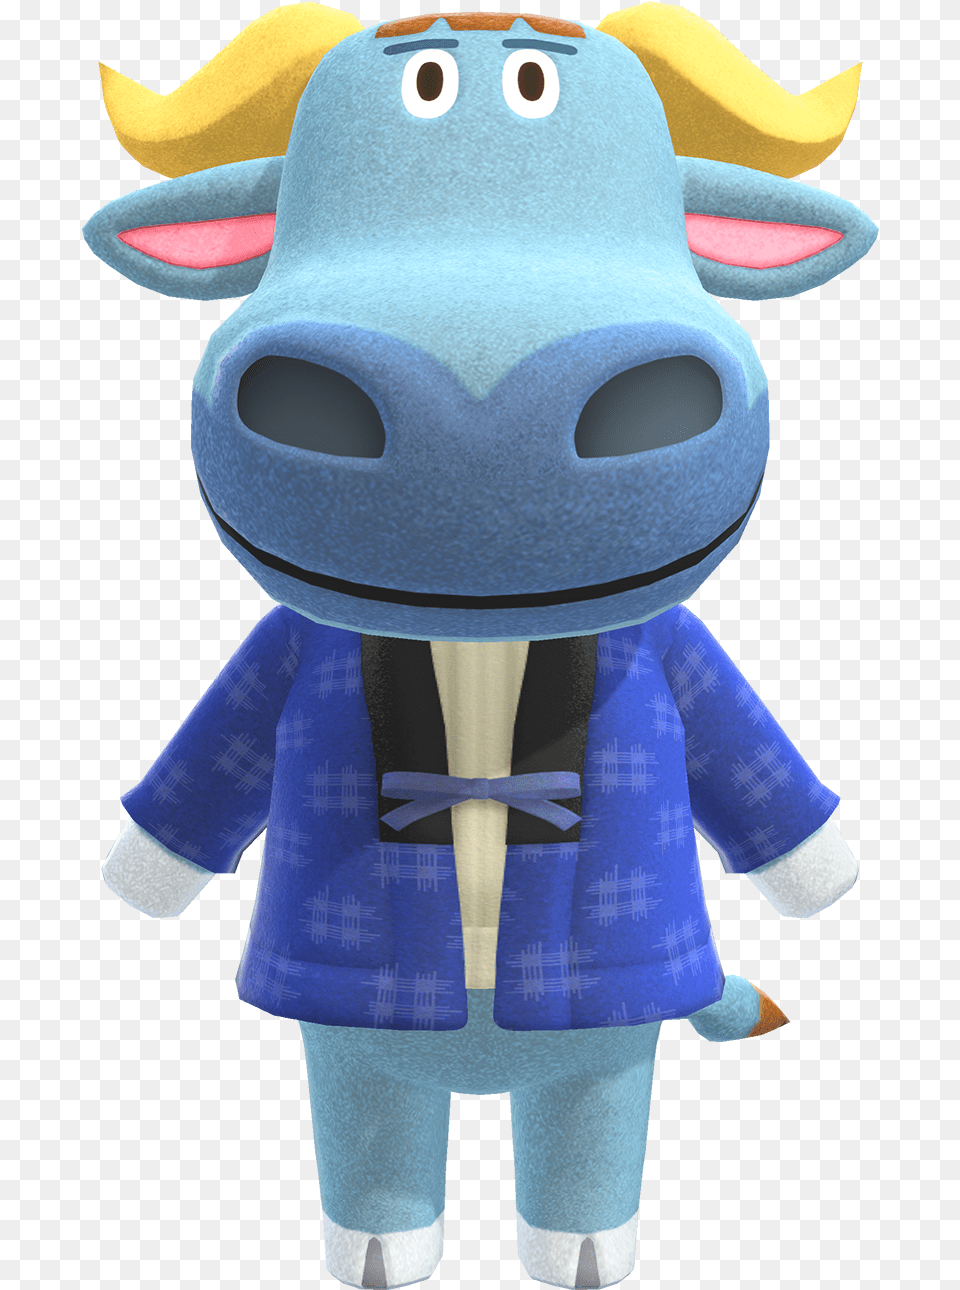 T Bone Nookipedia The Animal Crossing Wiki T Bone Acnh, Plush, Toy, Baby, Person Png Image